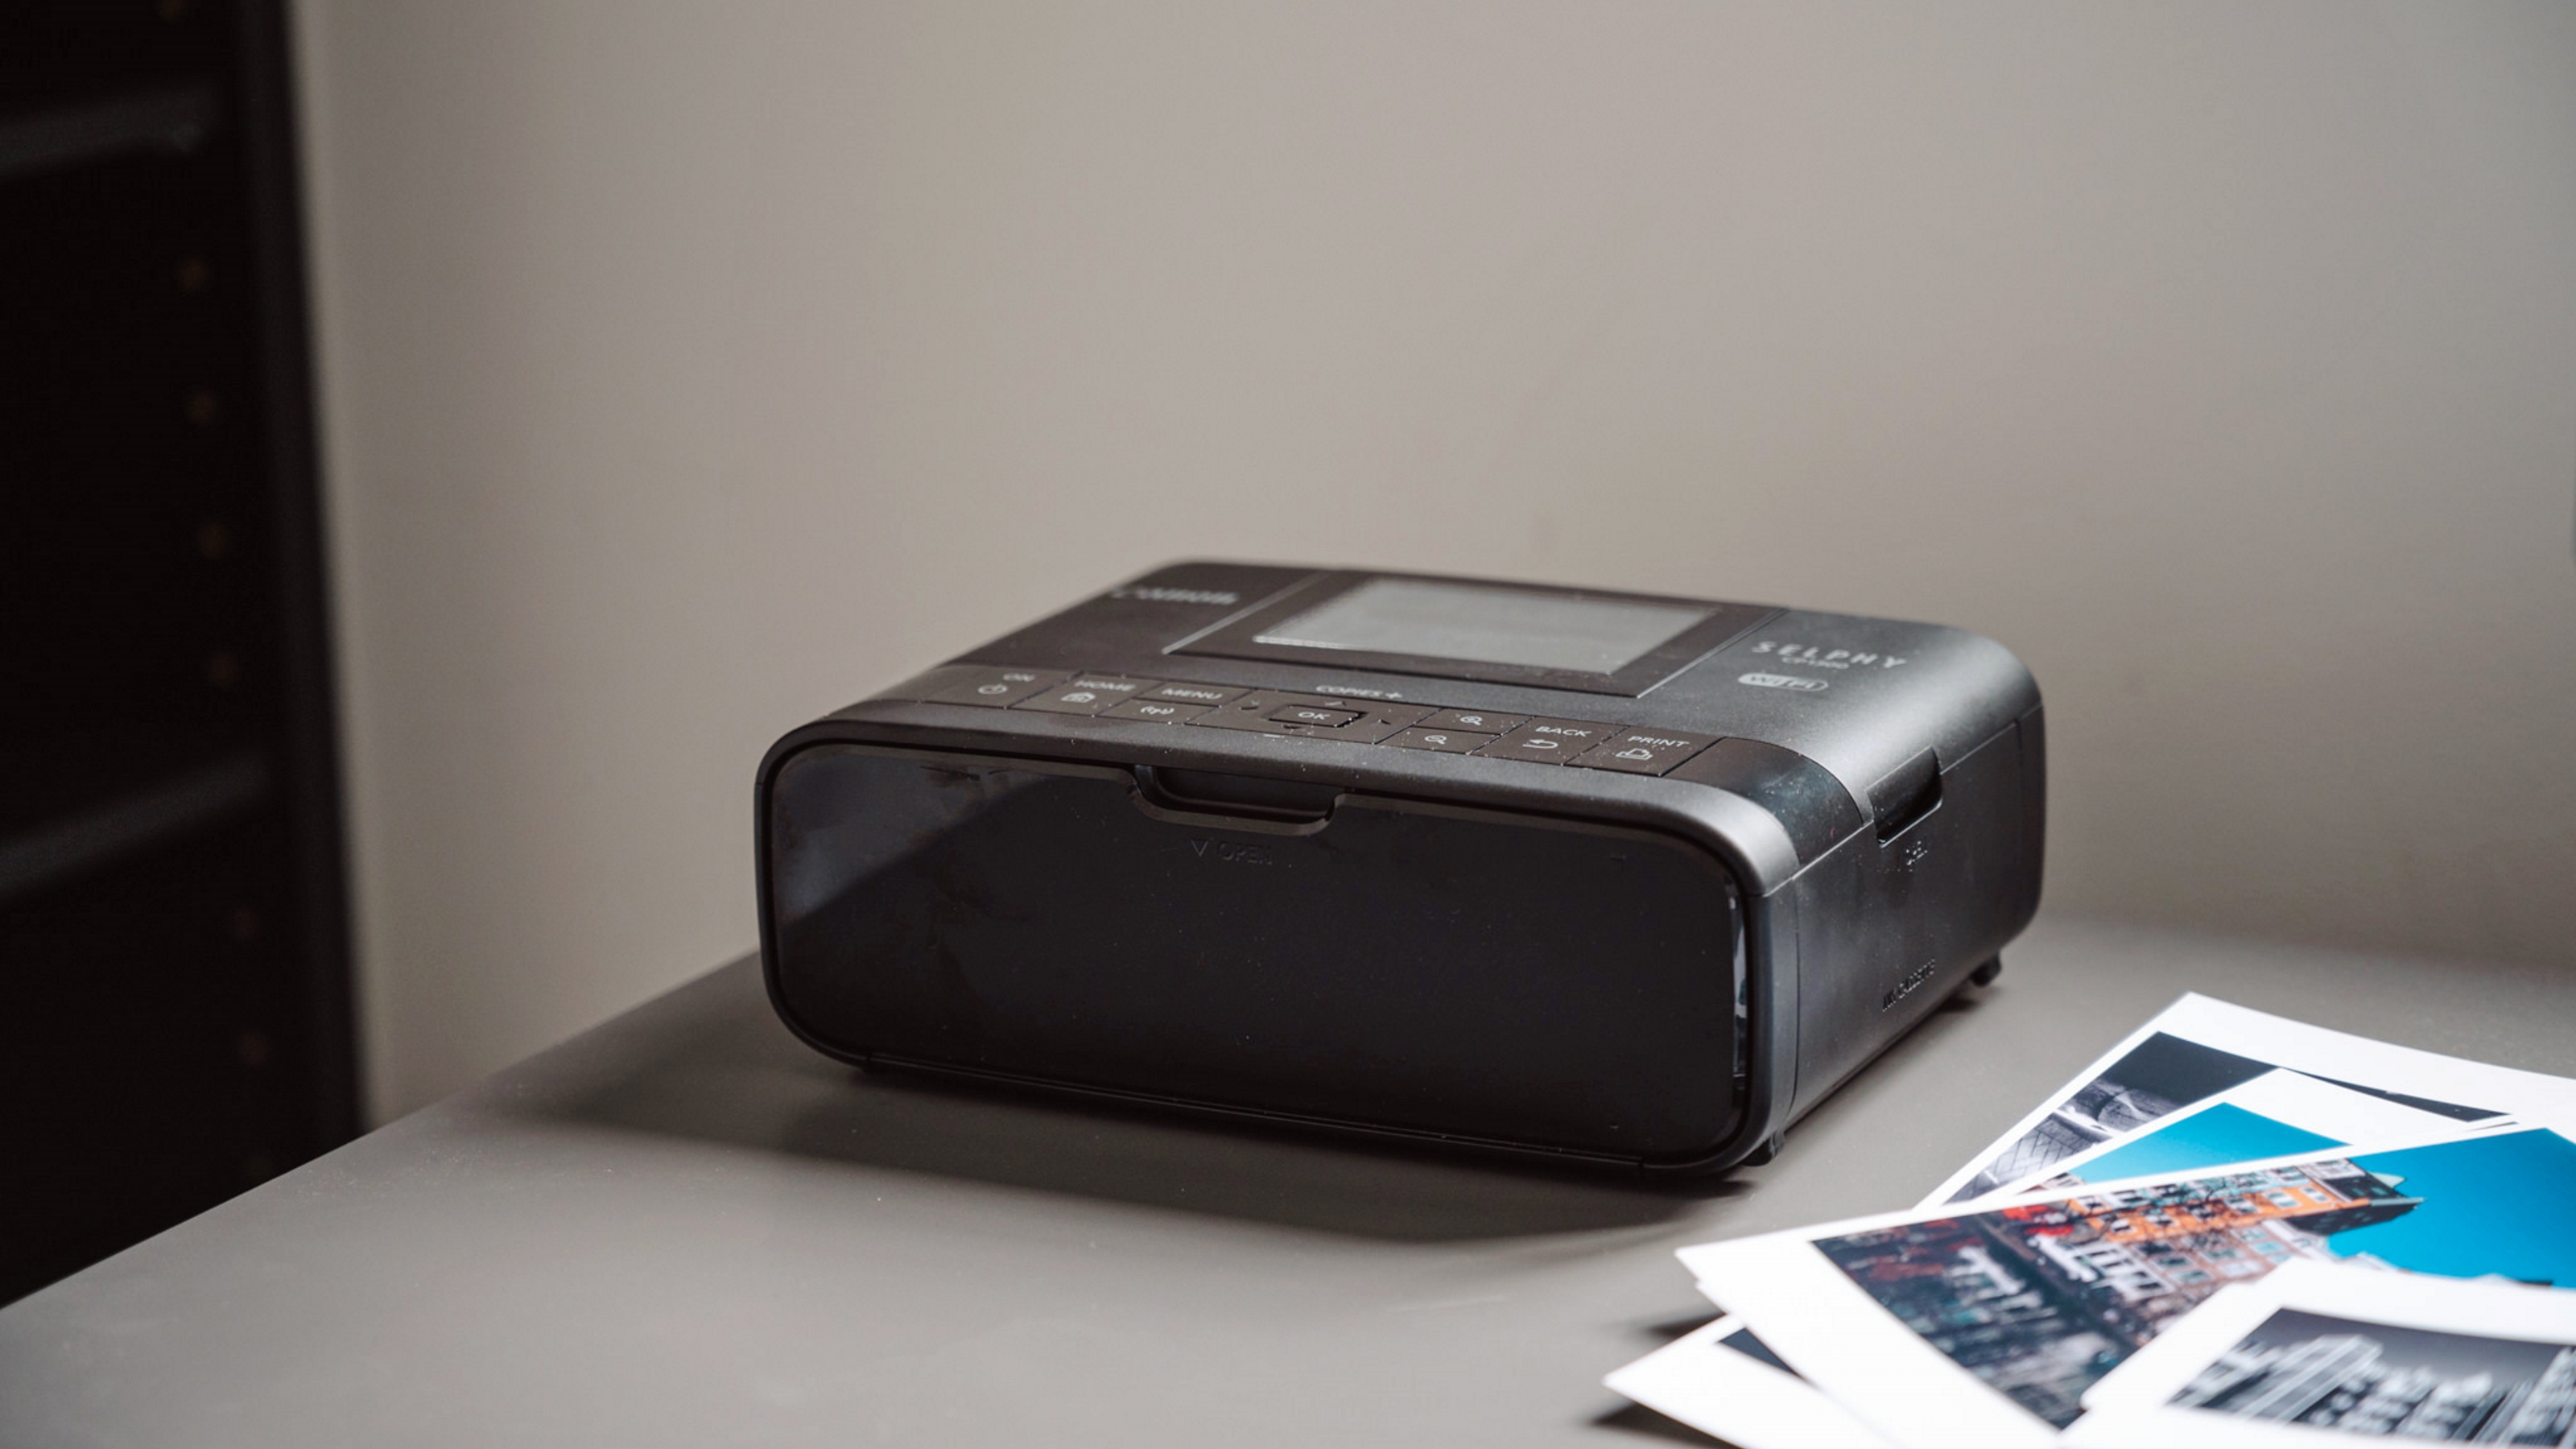 Canon Selphy Cp1300 Review Perfect For Picture Printing Real Homes 5966